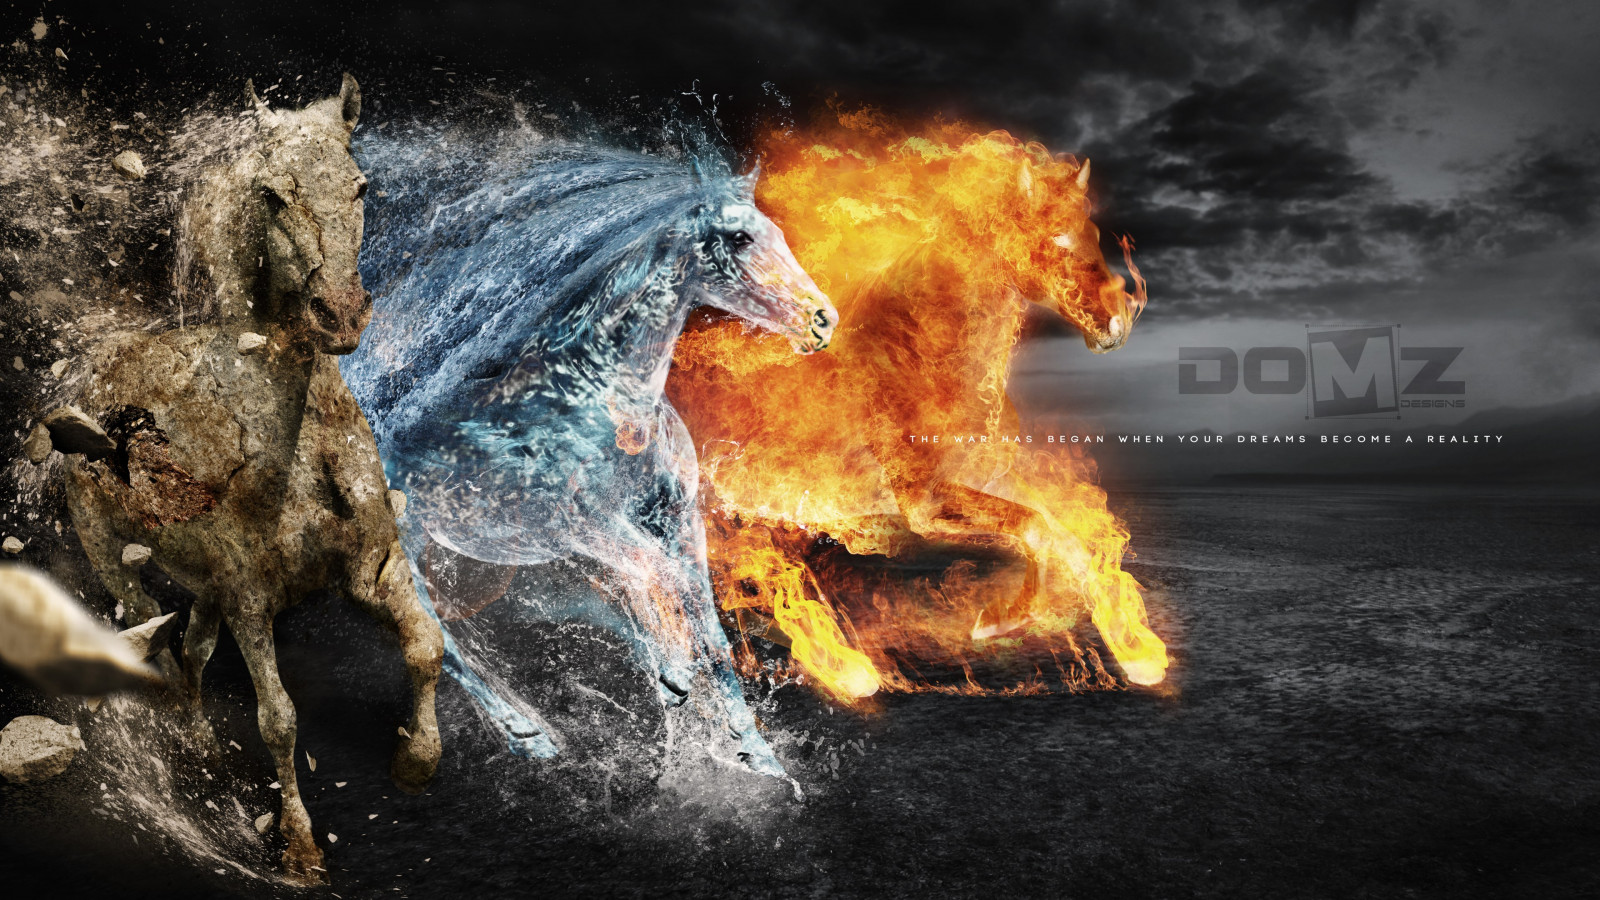 Horses of: Earth, Fire and Water wallpaper 1600x900